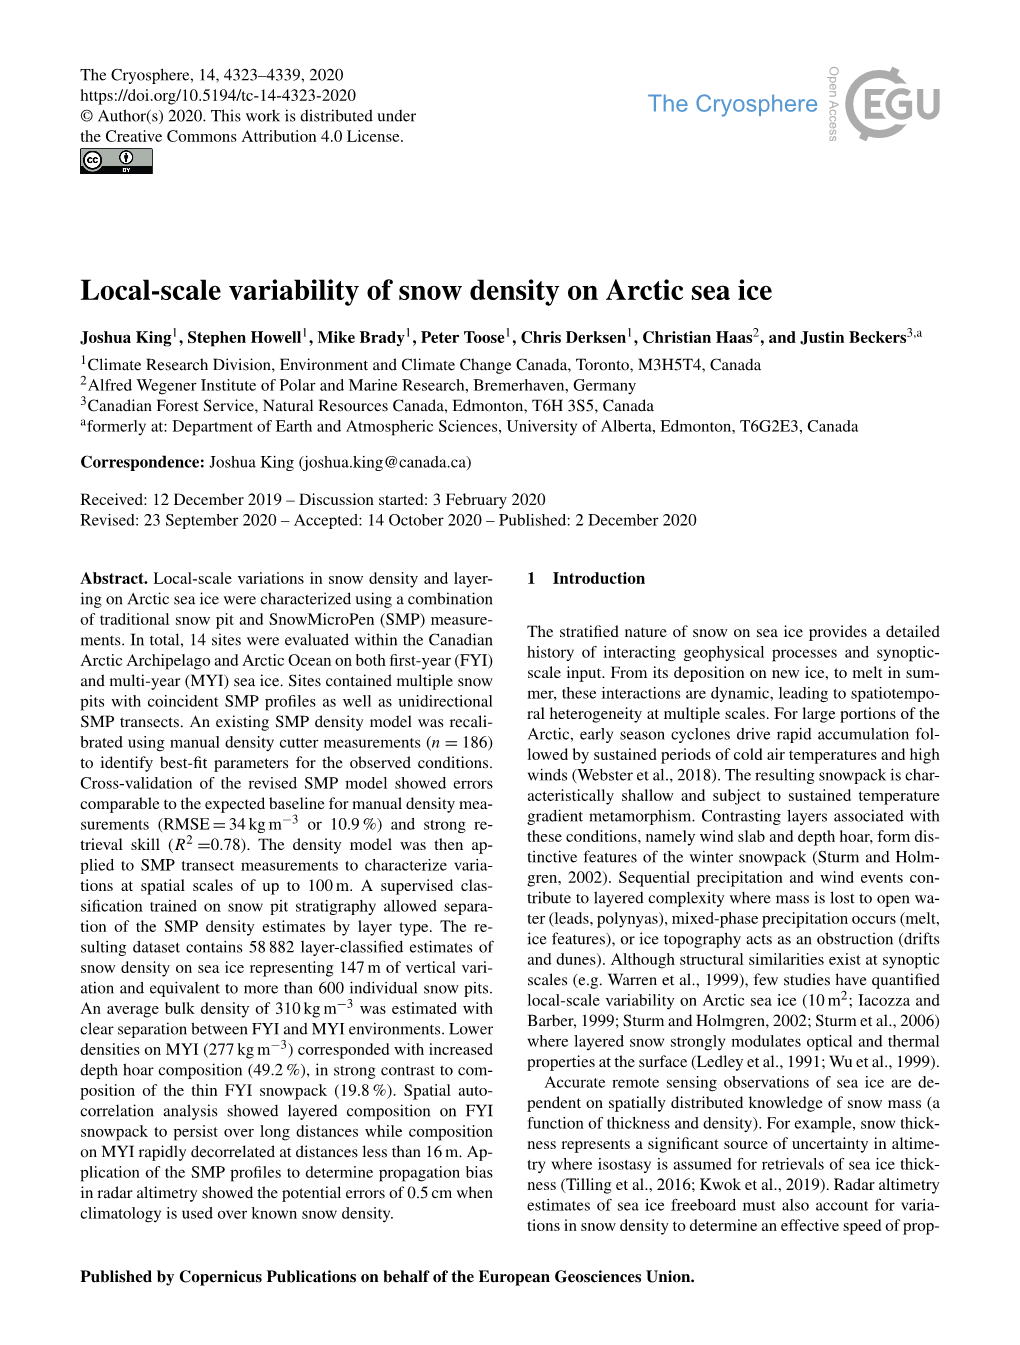 Local-Scale Variability of Snow Density on Arctic Sea Ice